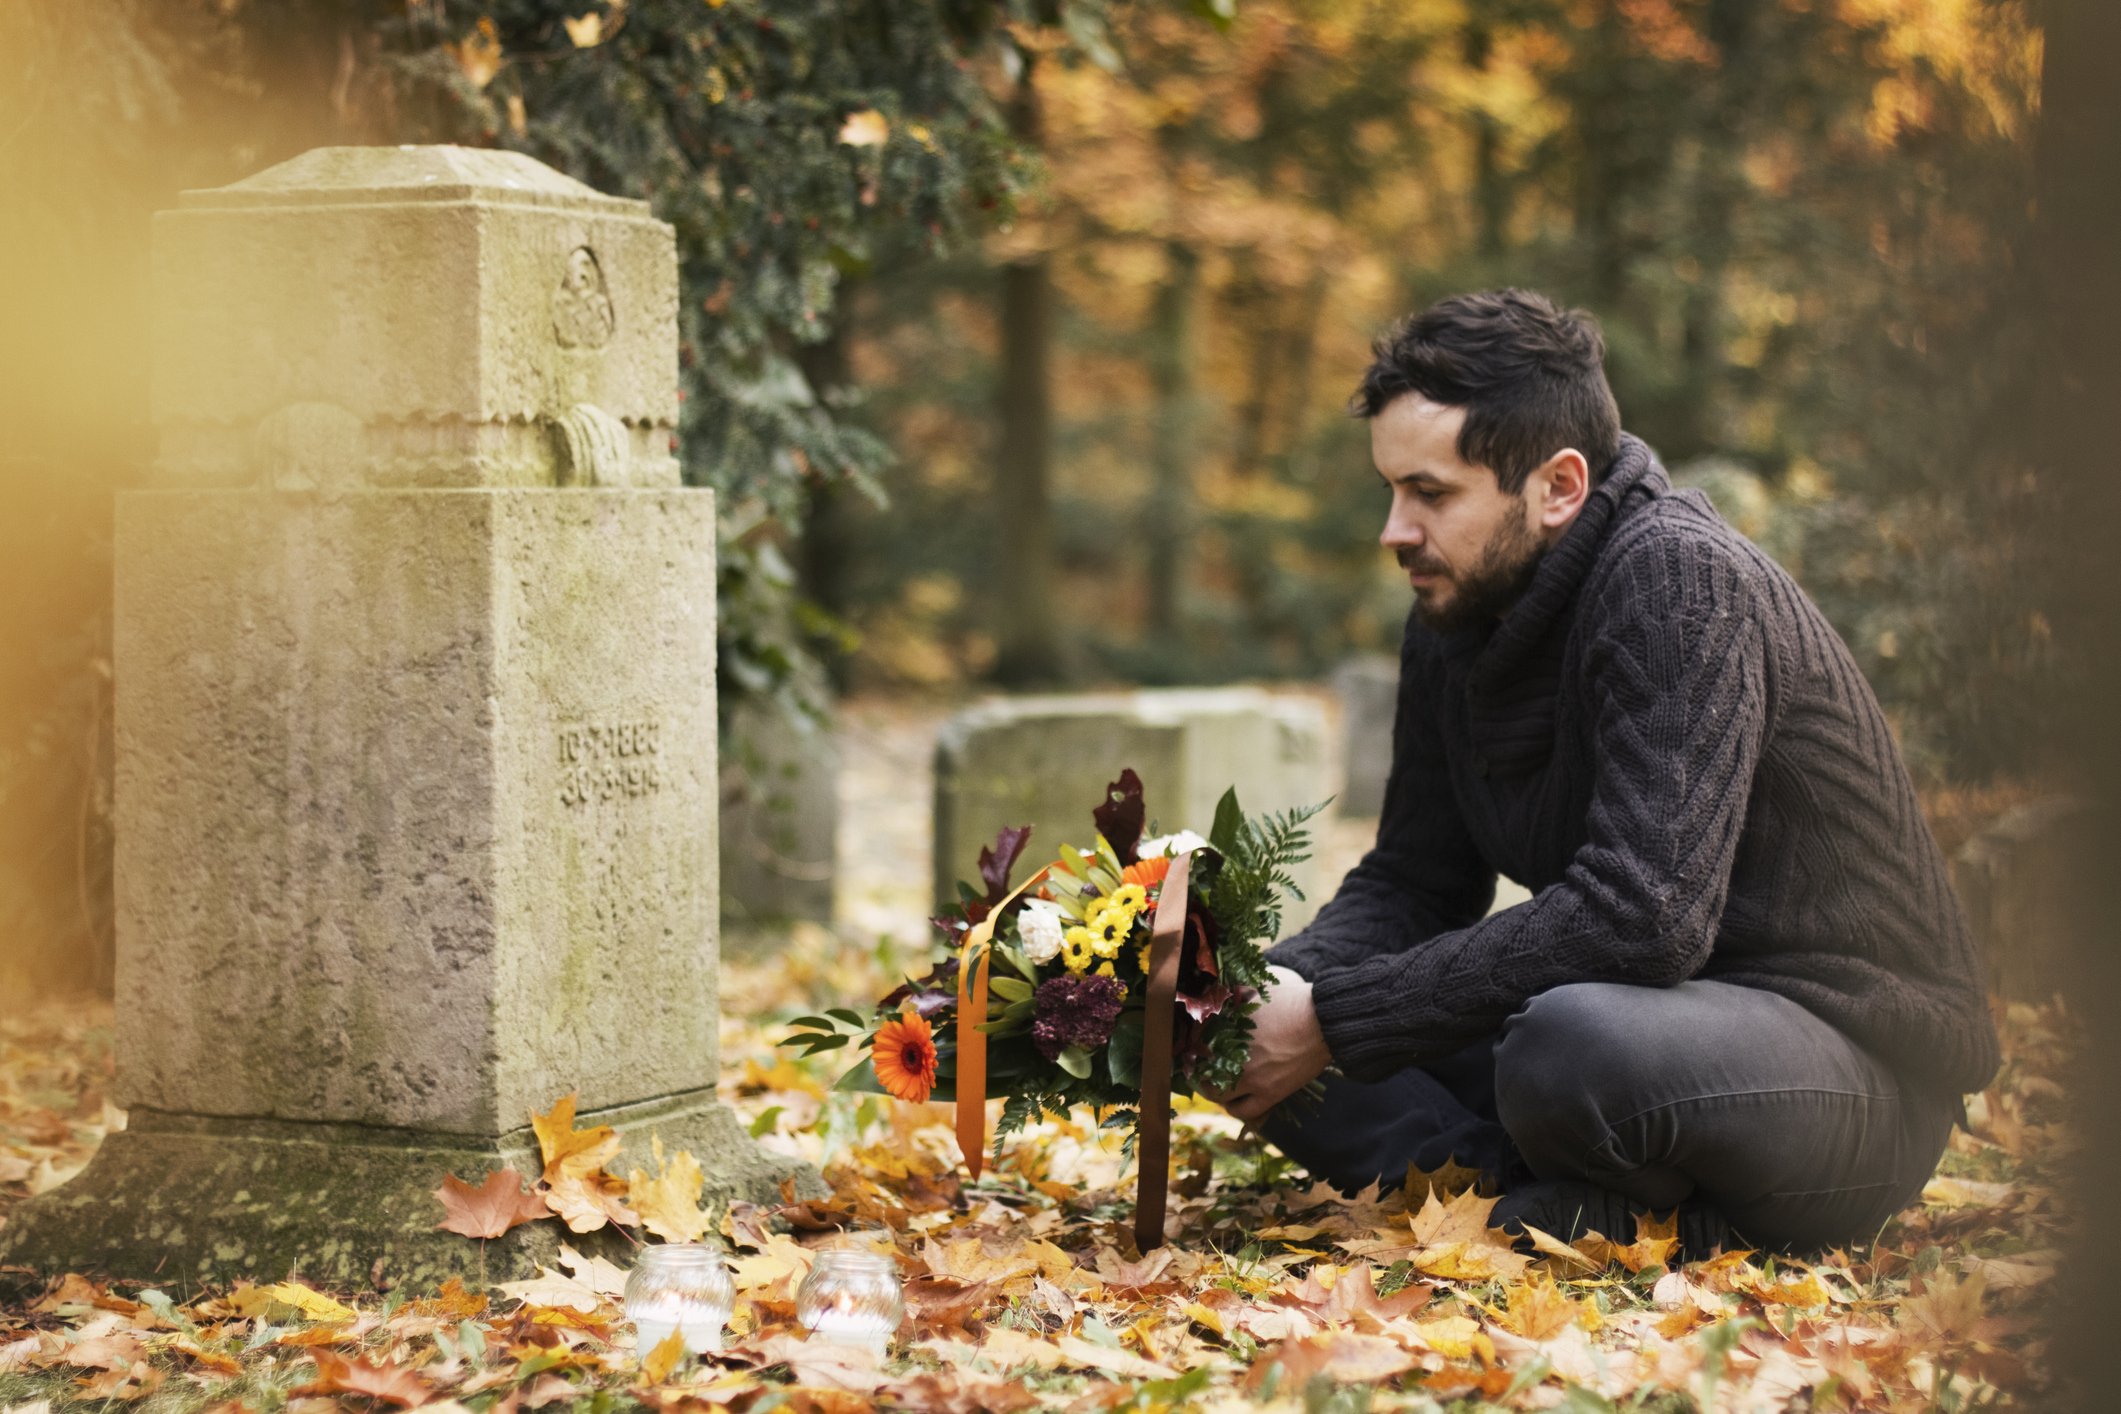 Kevin remained there by her grave, reminiscing about the memories they had together until sunset | Source: Pexels